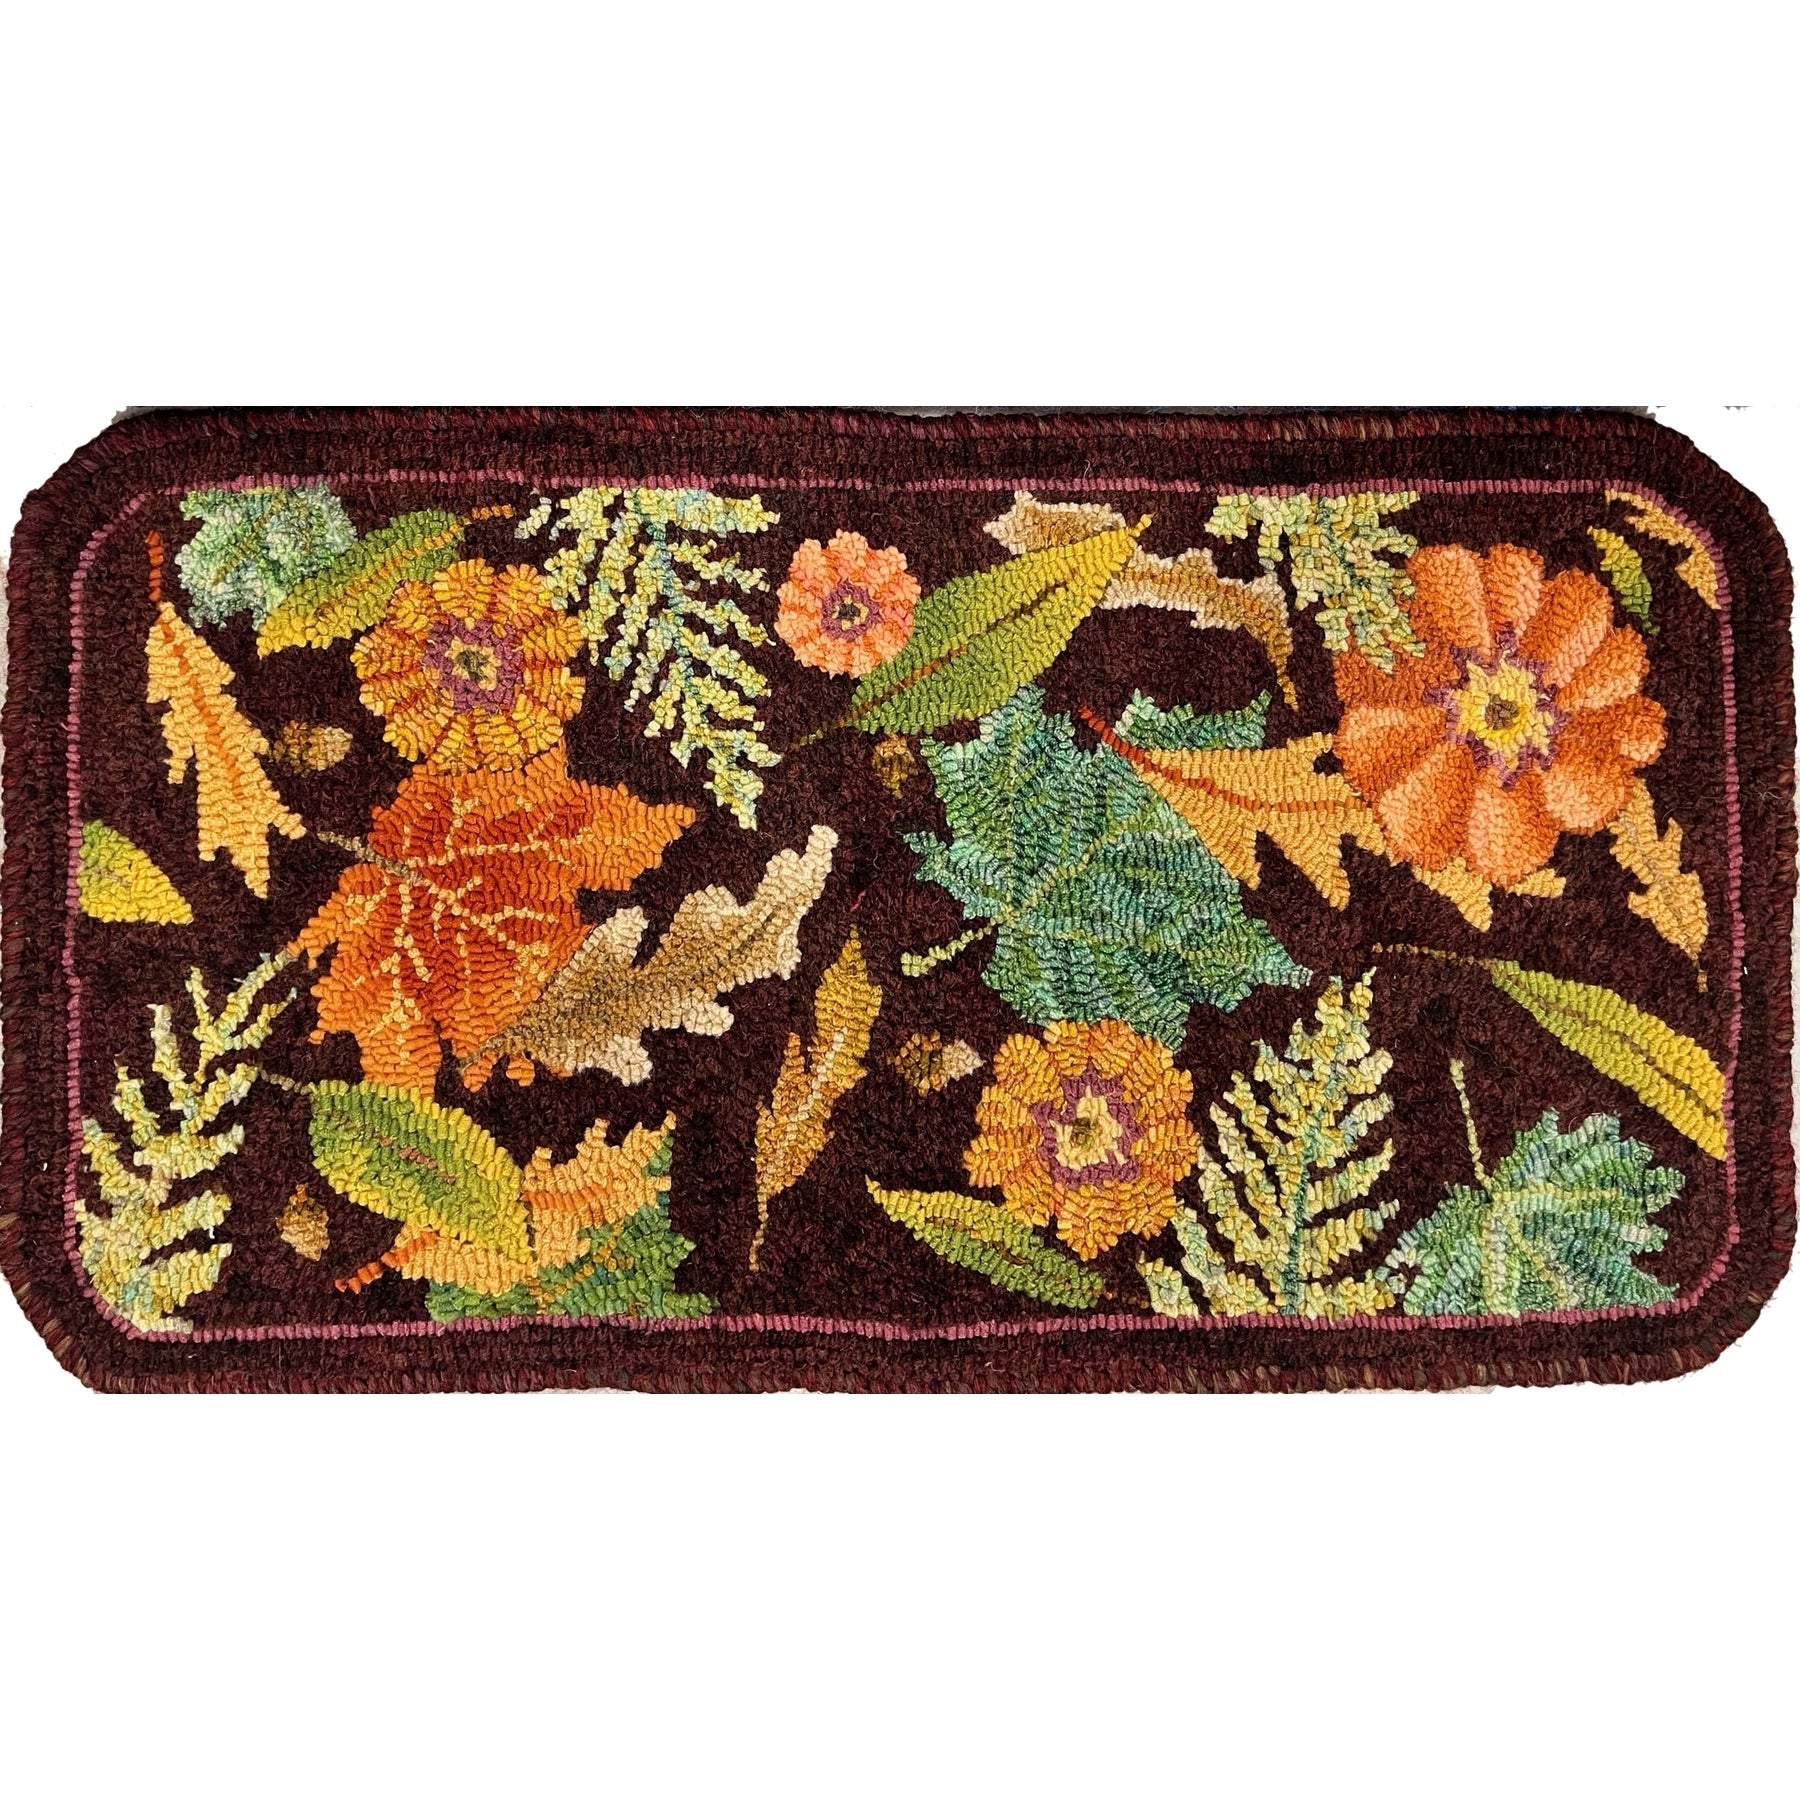 Fall Floor, rug hooked by Connie Bradley